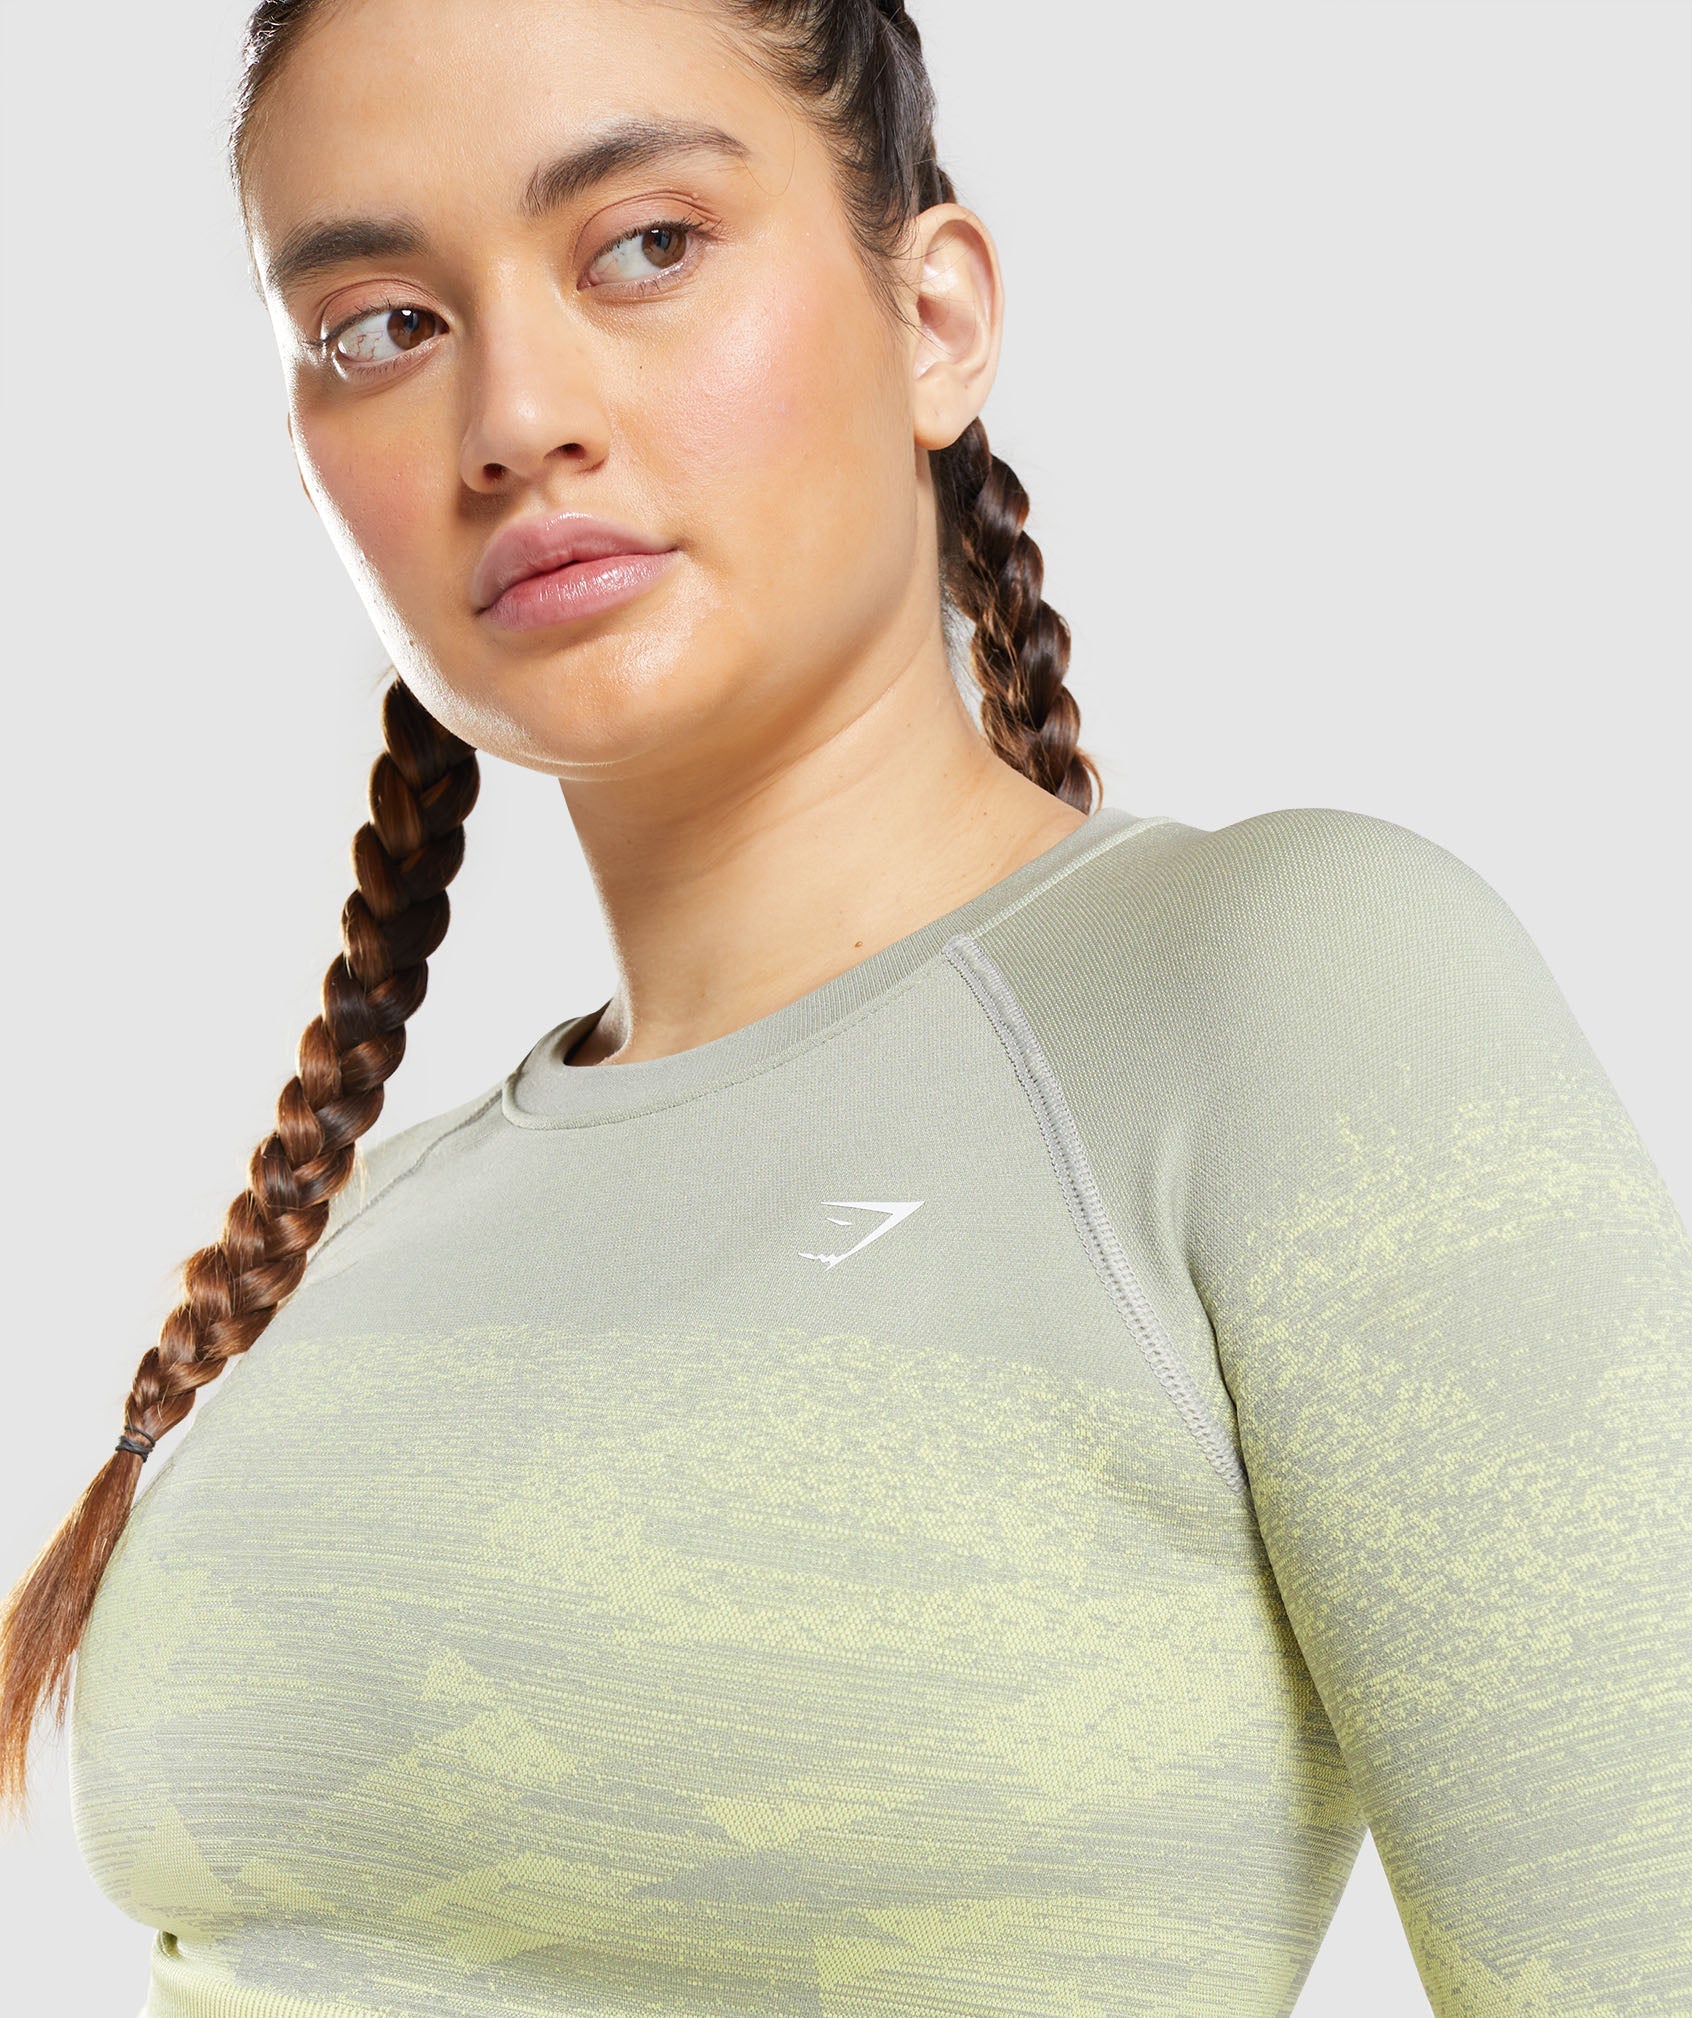 Adapt Ombre Crop Top in Triangle | Taupe Grey Print - view 5